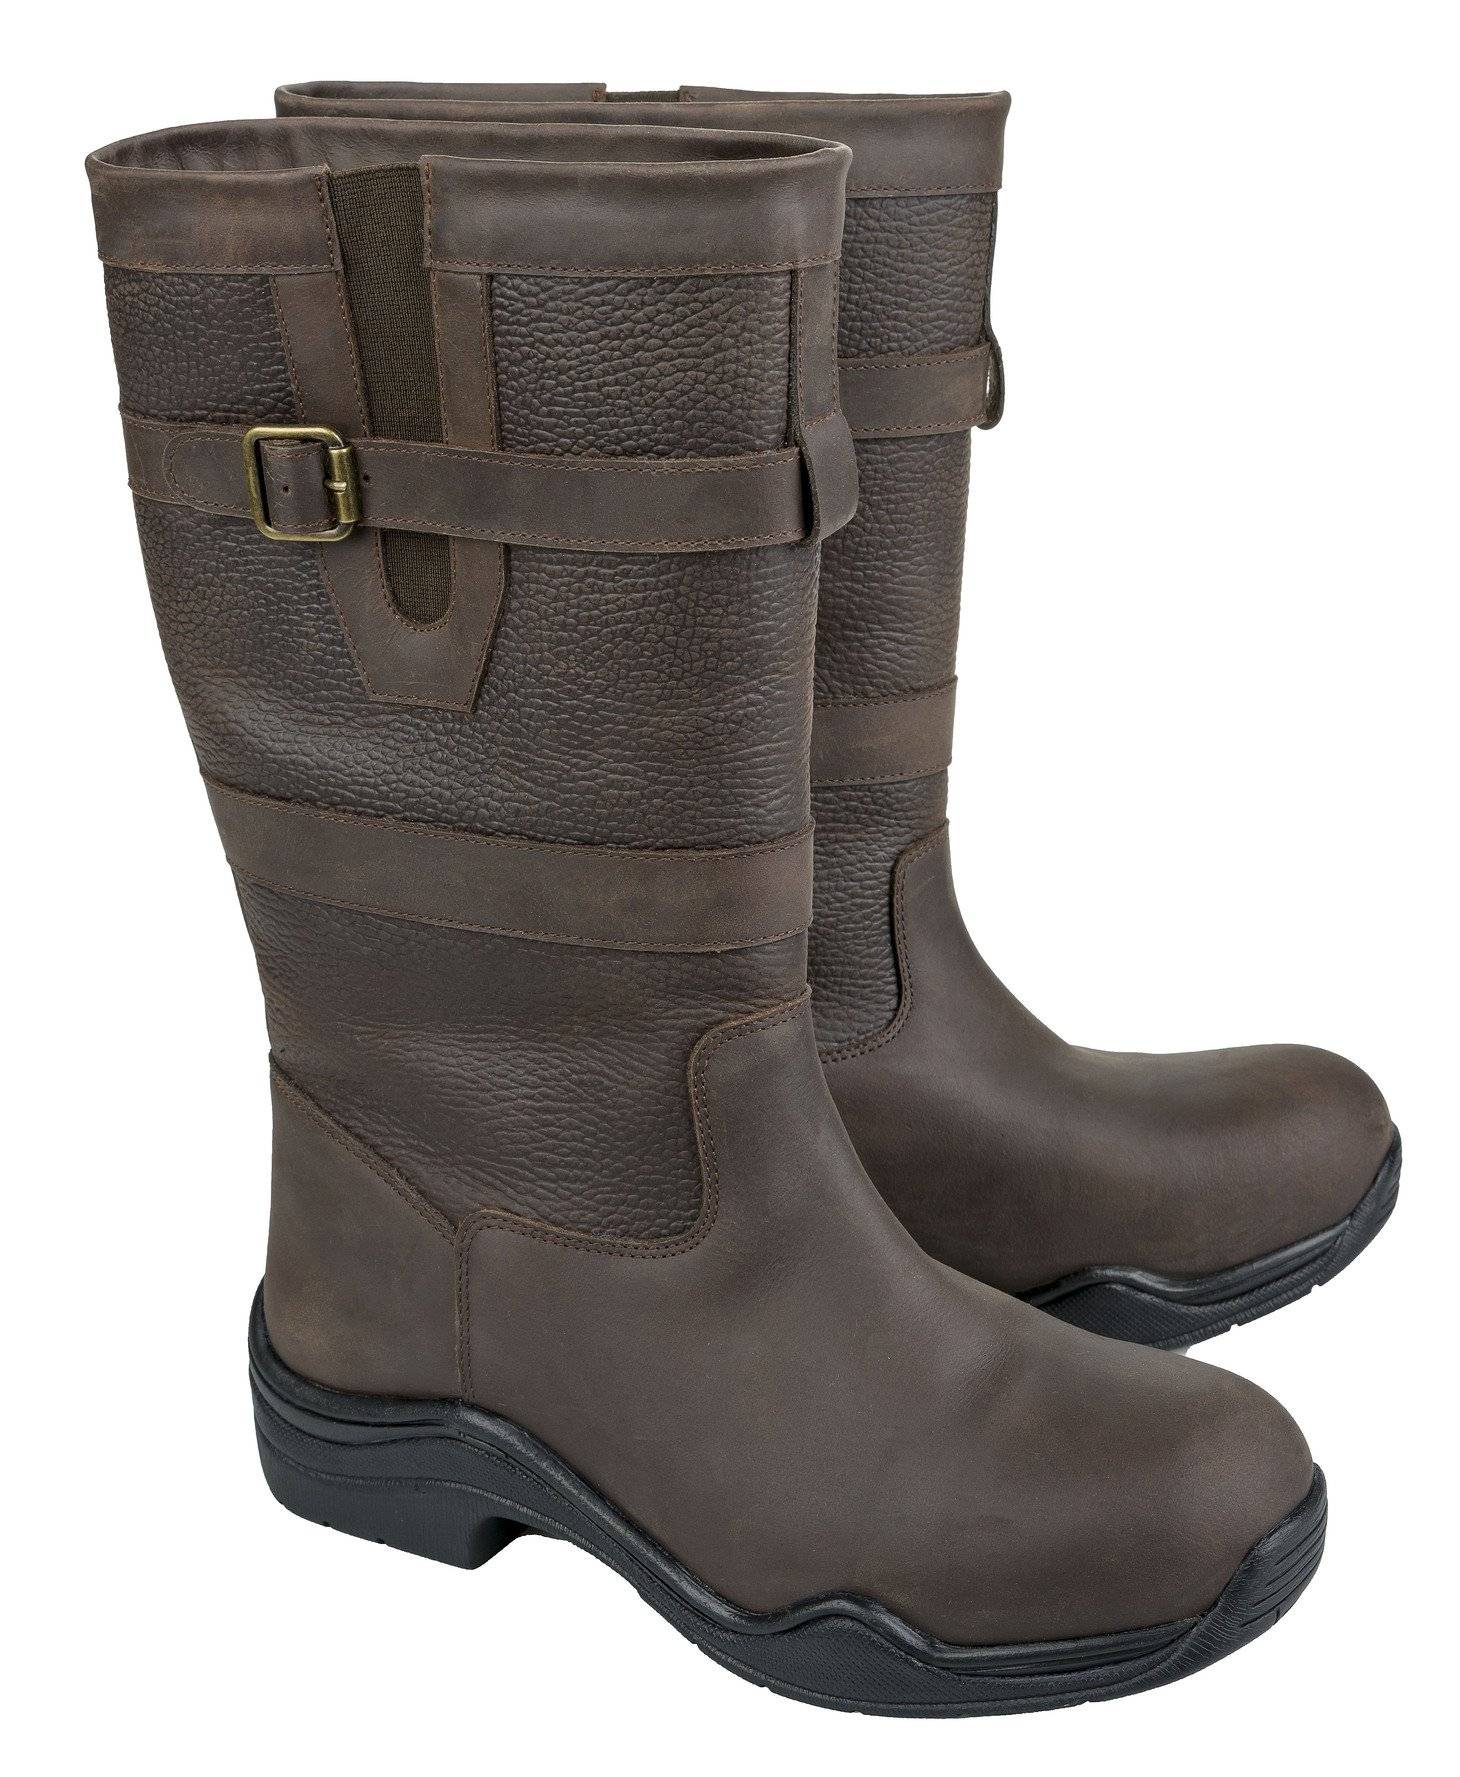 Ladies Bullboxer Wellington Waterproof Riding Country Boot Calf High Sizes 4-8 